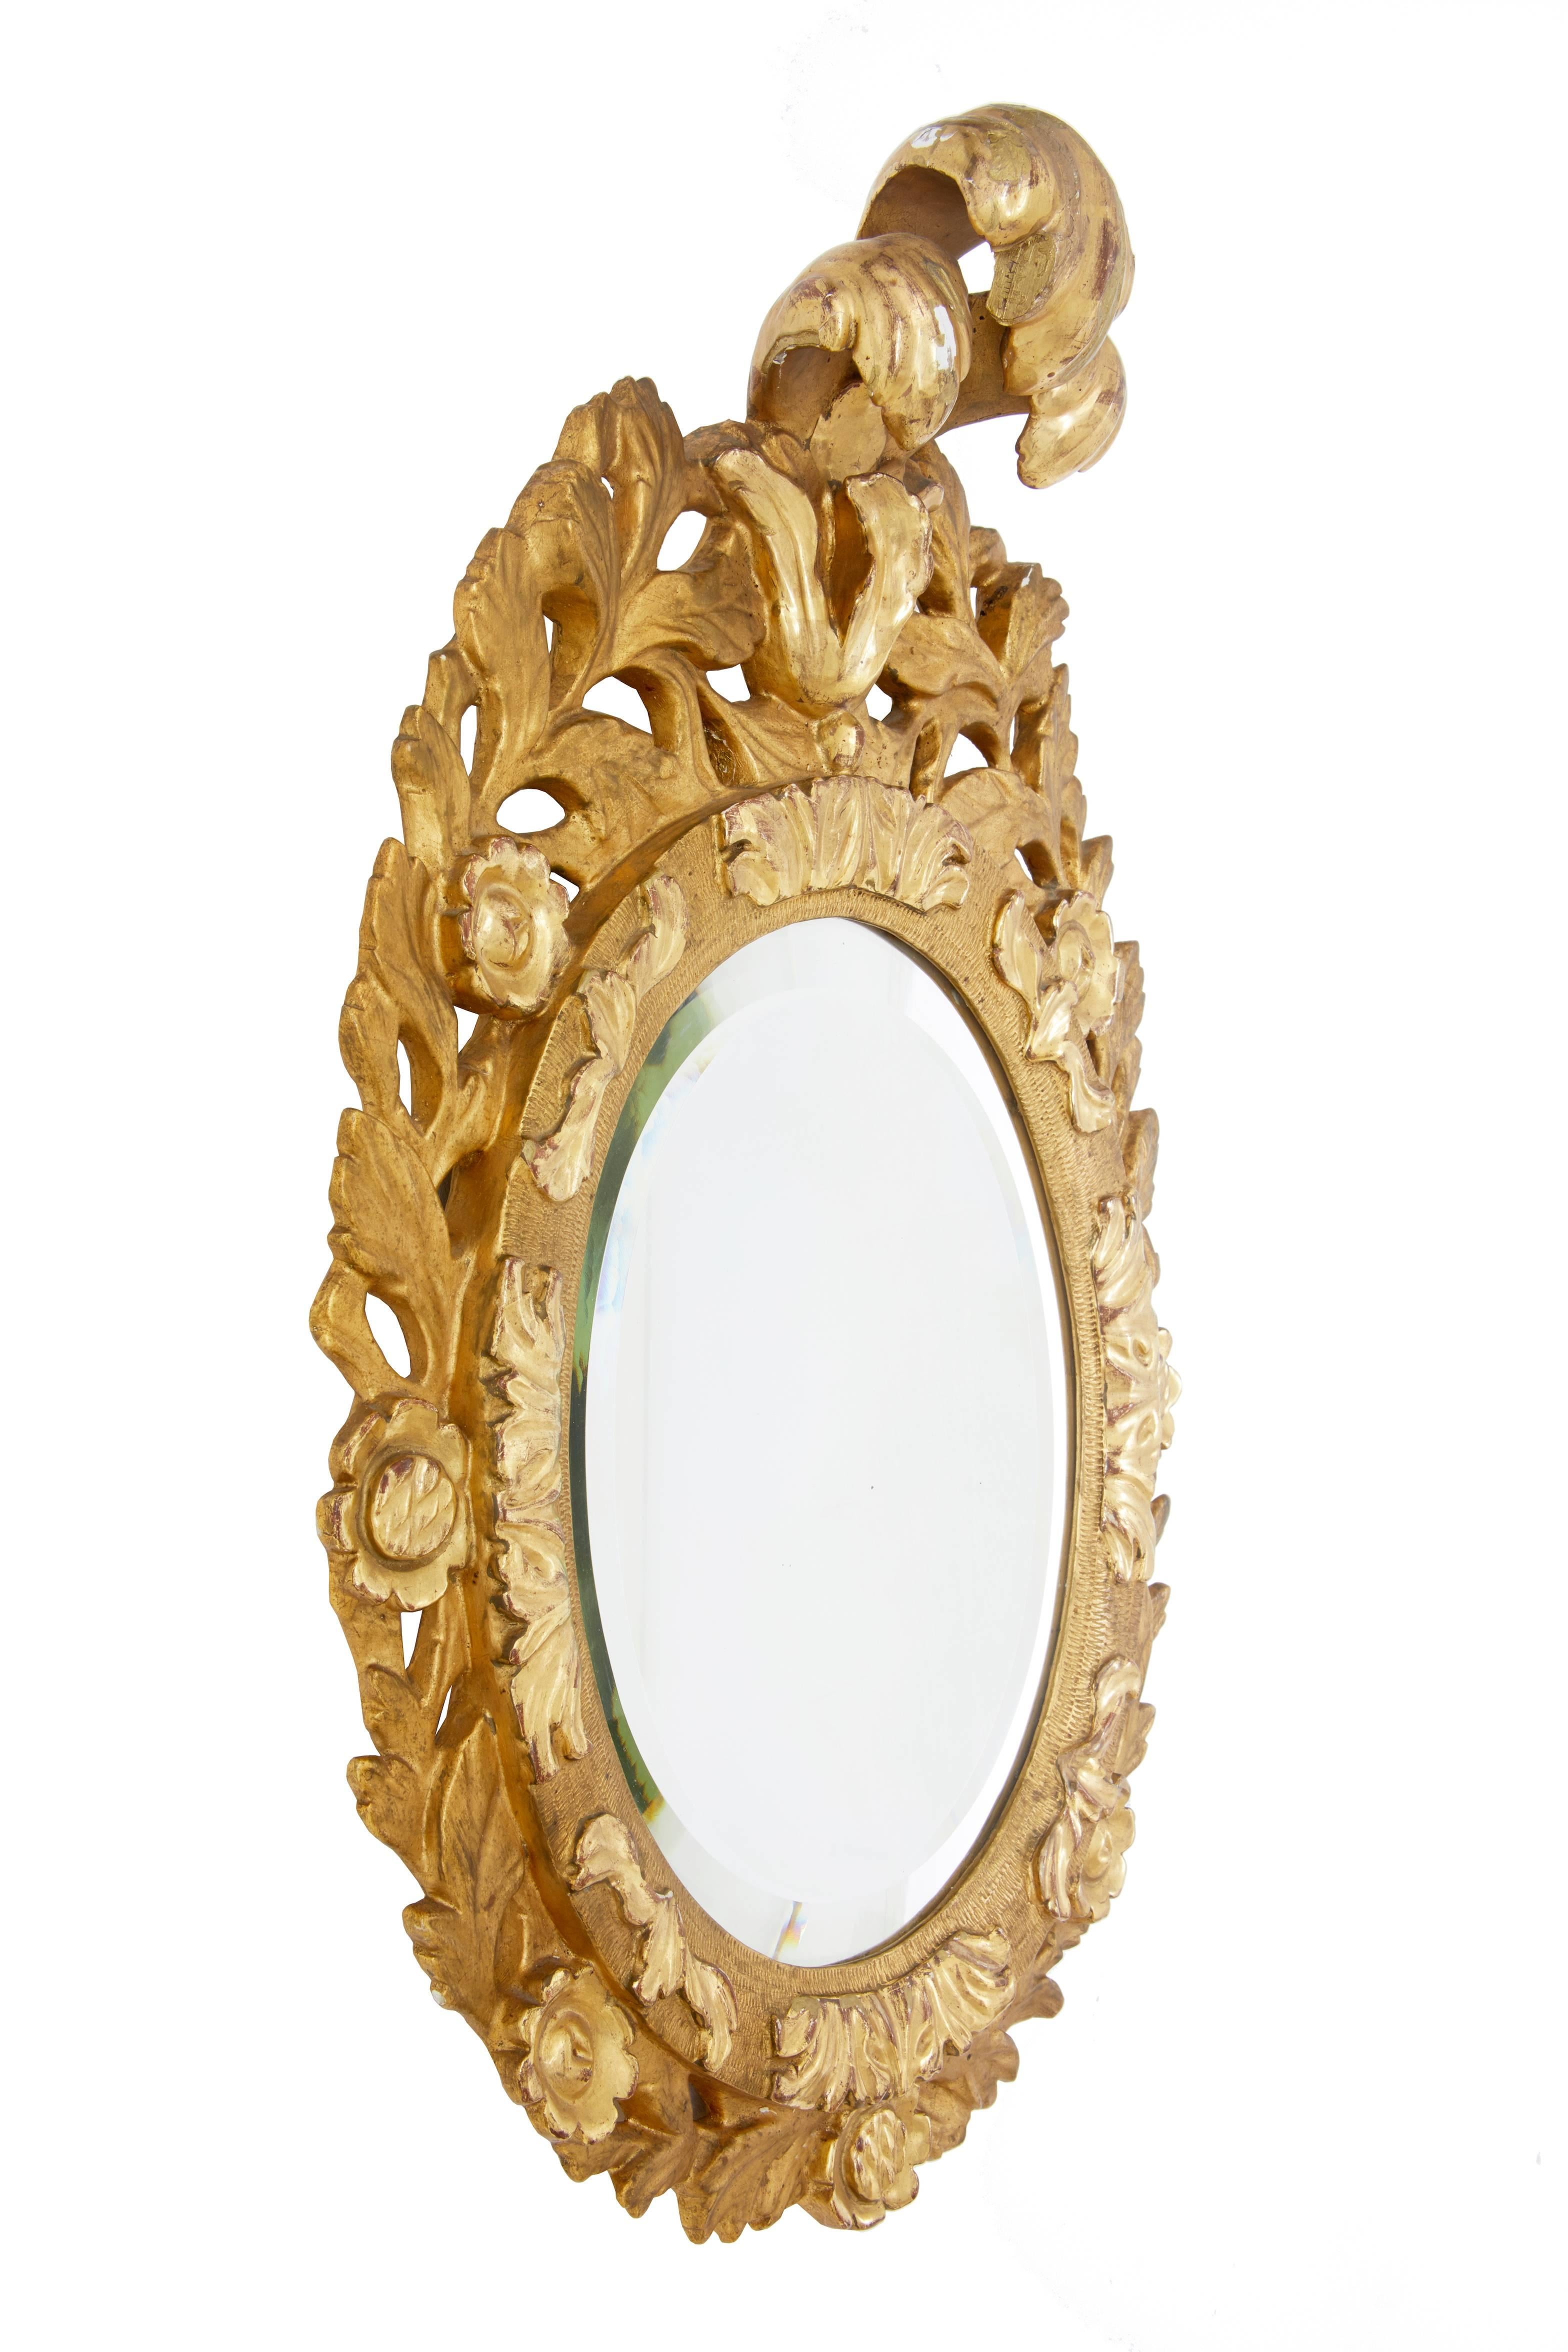 Good quality carved gilt mirror, circa 1890.
Leaf pattern around the outer edge, surmounted by large over hanging leaves.
Minor gilt losses and rubbing.
Measures: Height 23 1/4